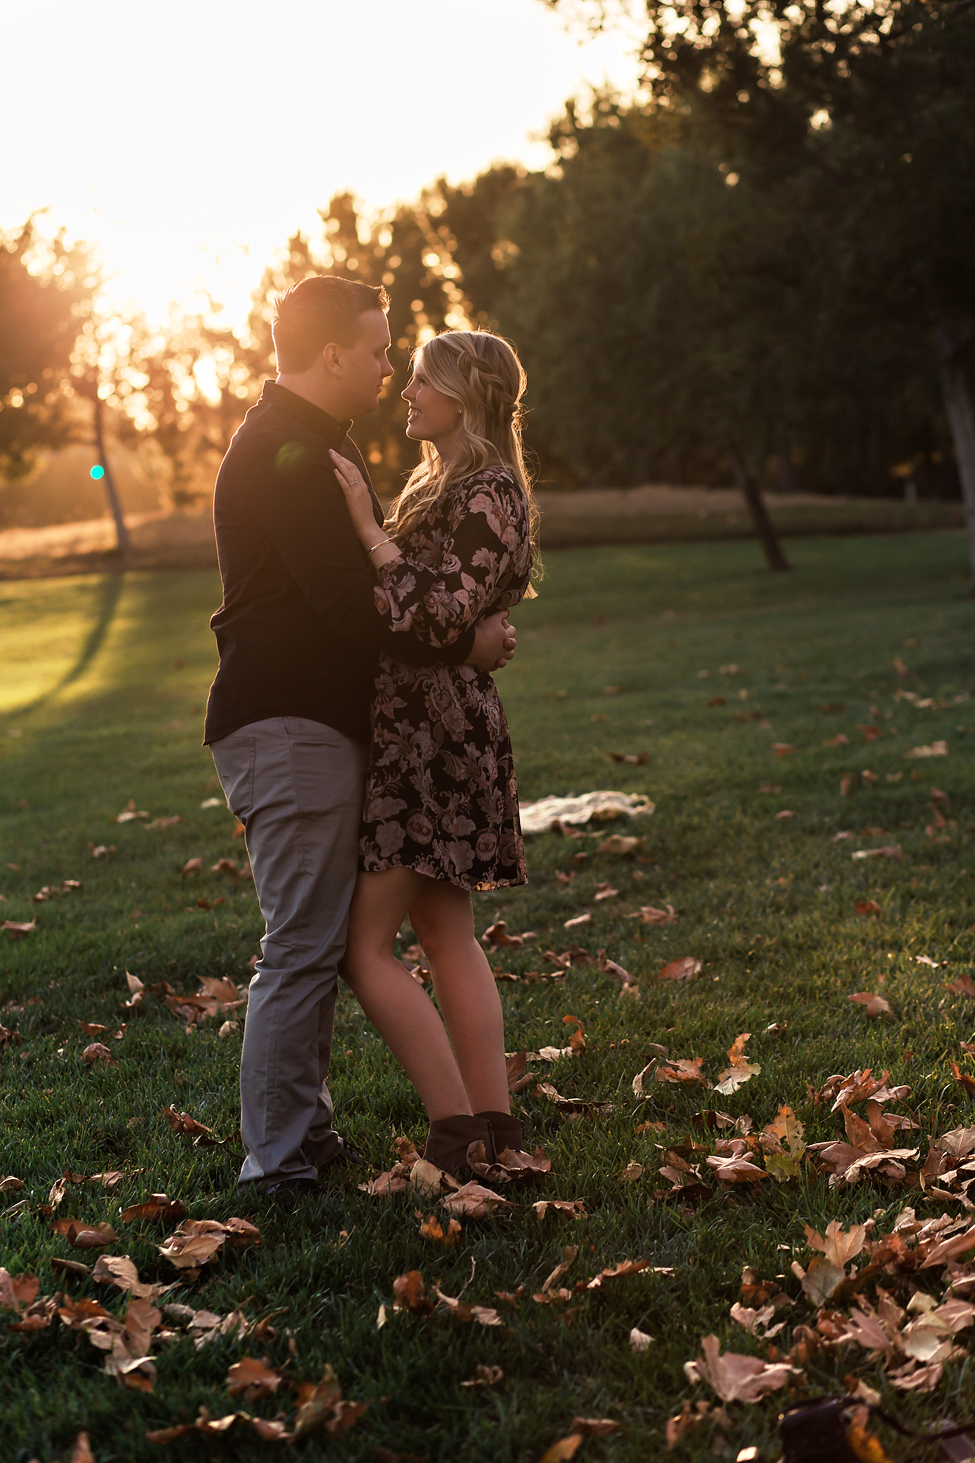 Sunset in Orange County engaged couple photograph